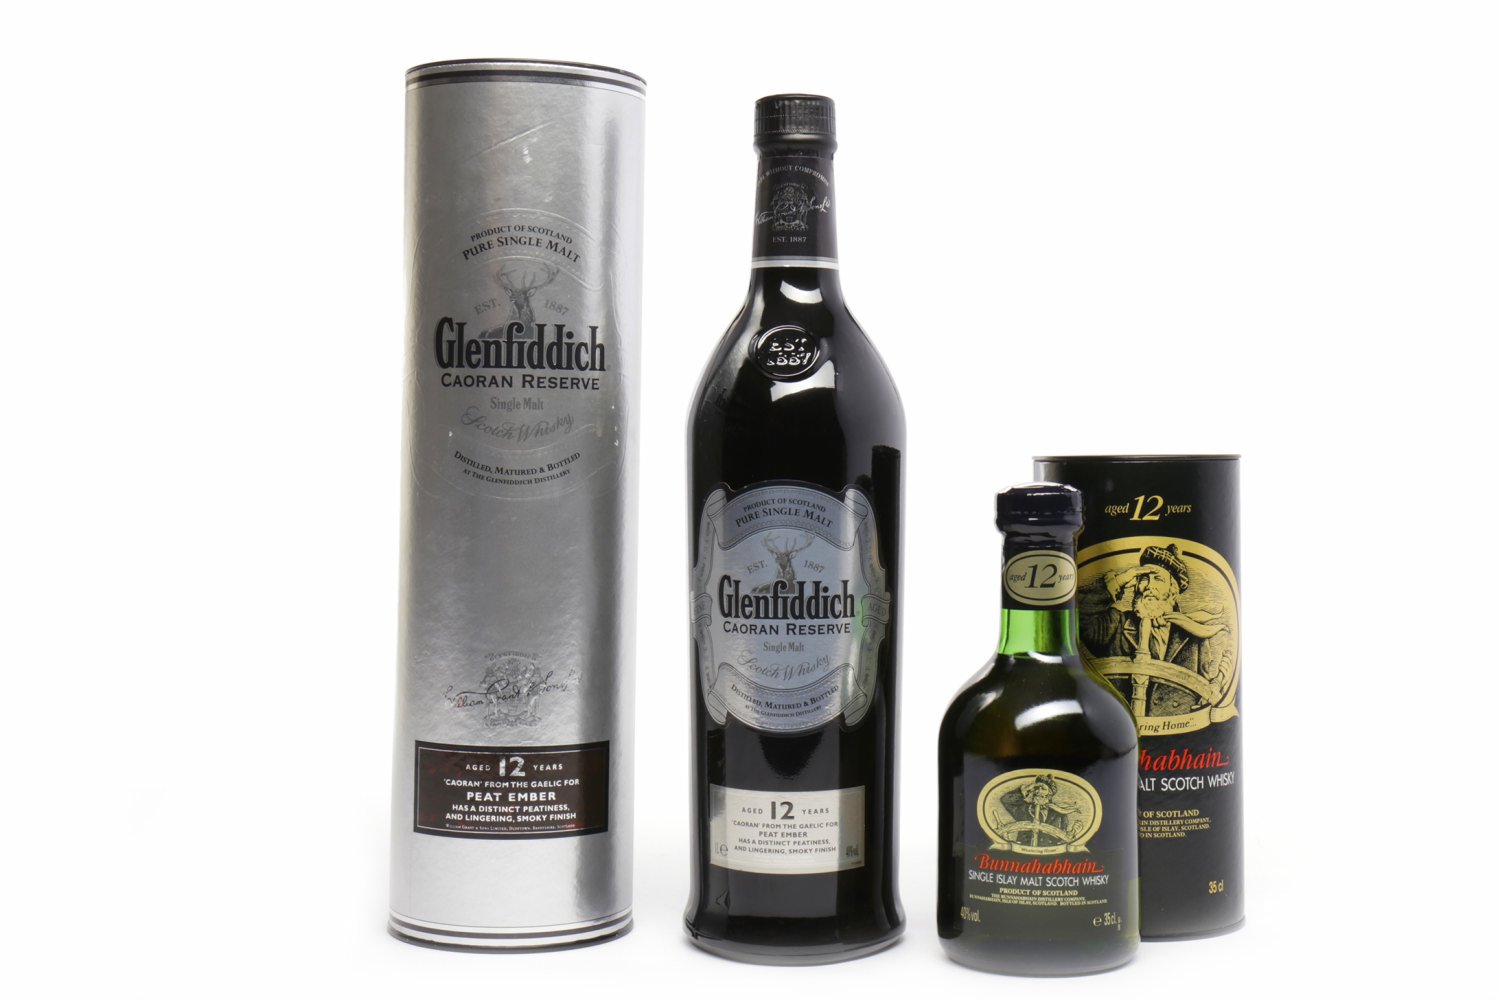 GLENFIDDICH CAORAN RESERVE AGED 12 YEARS Active. Dufftown, Banffshire. 1 litre, 40% volume, in tube.